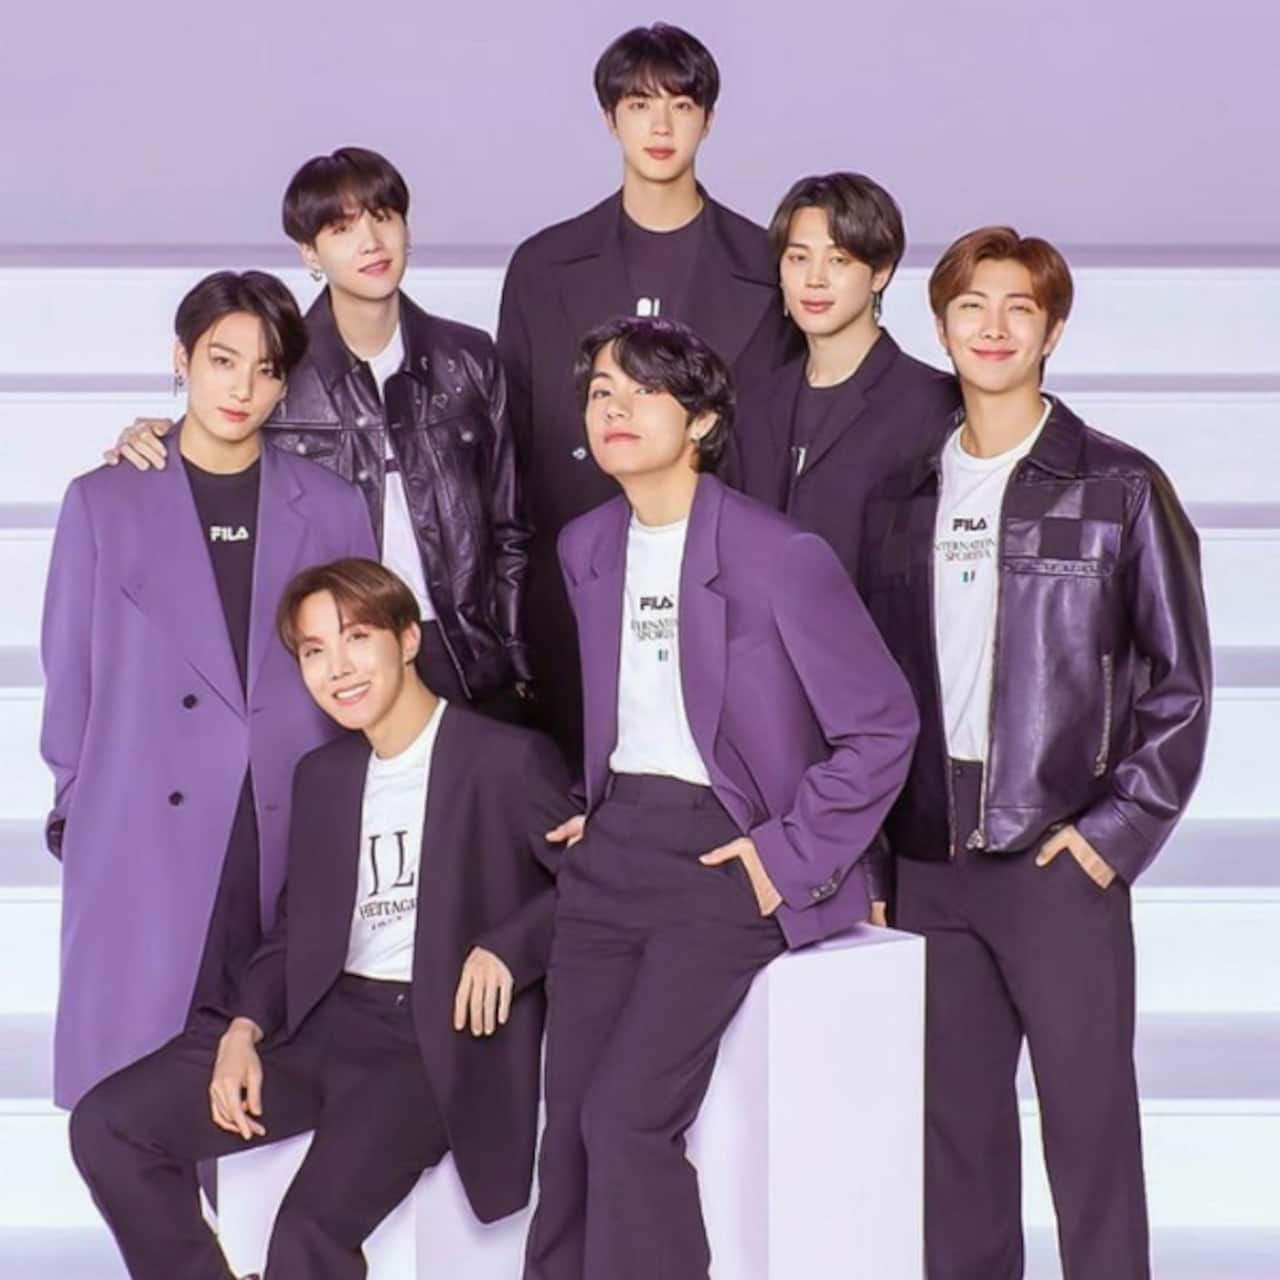 BTS ARMY in India gets hopeful of a concert in early 2023 as